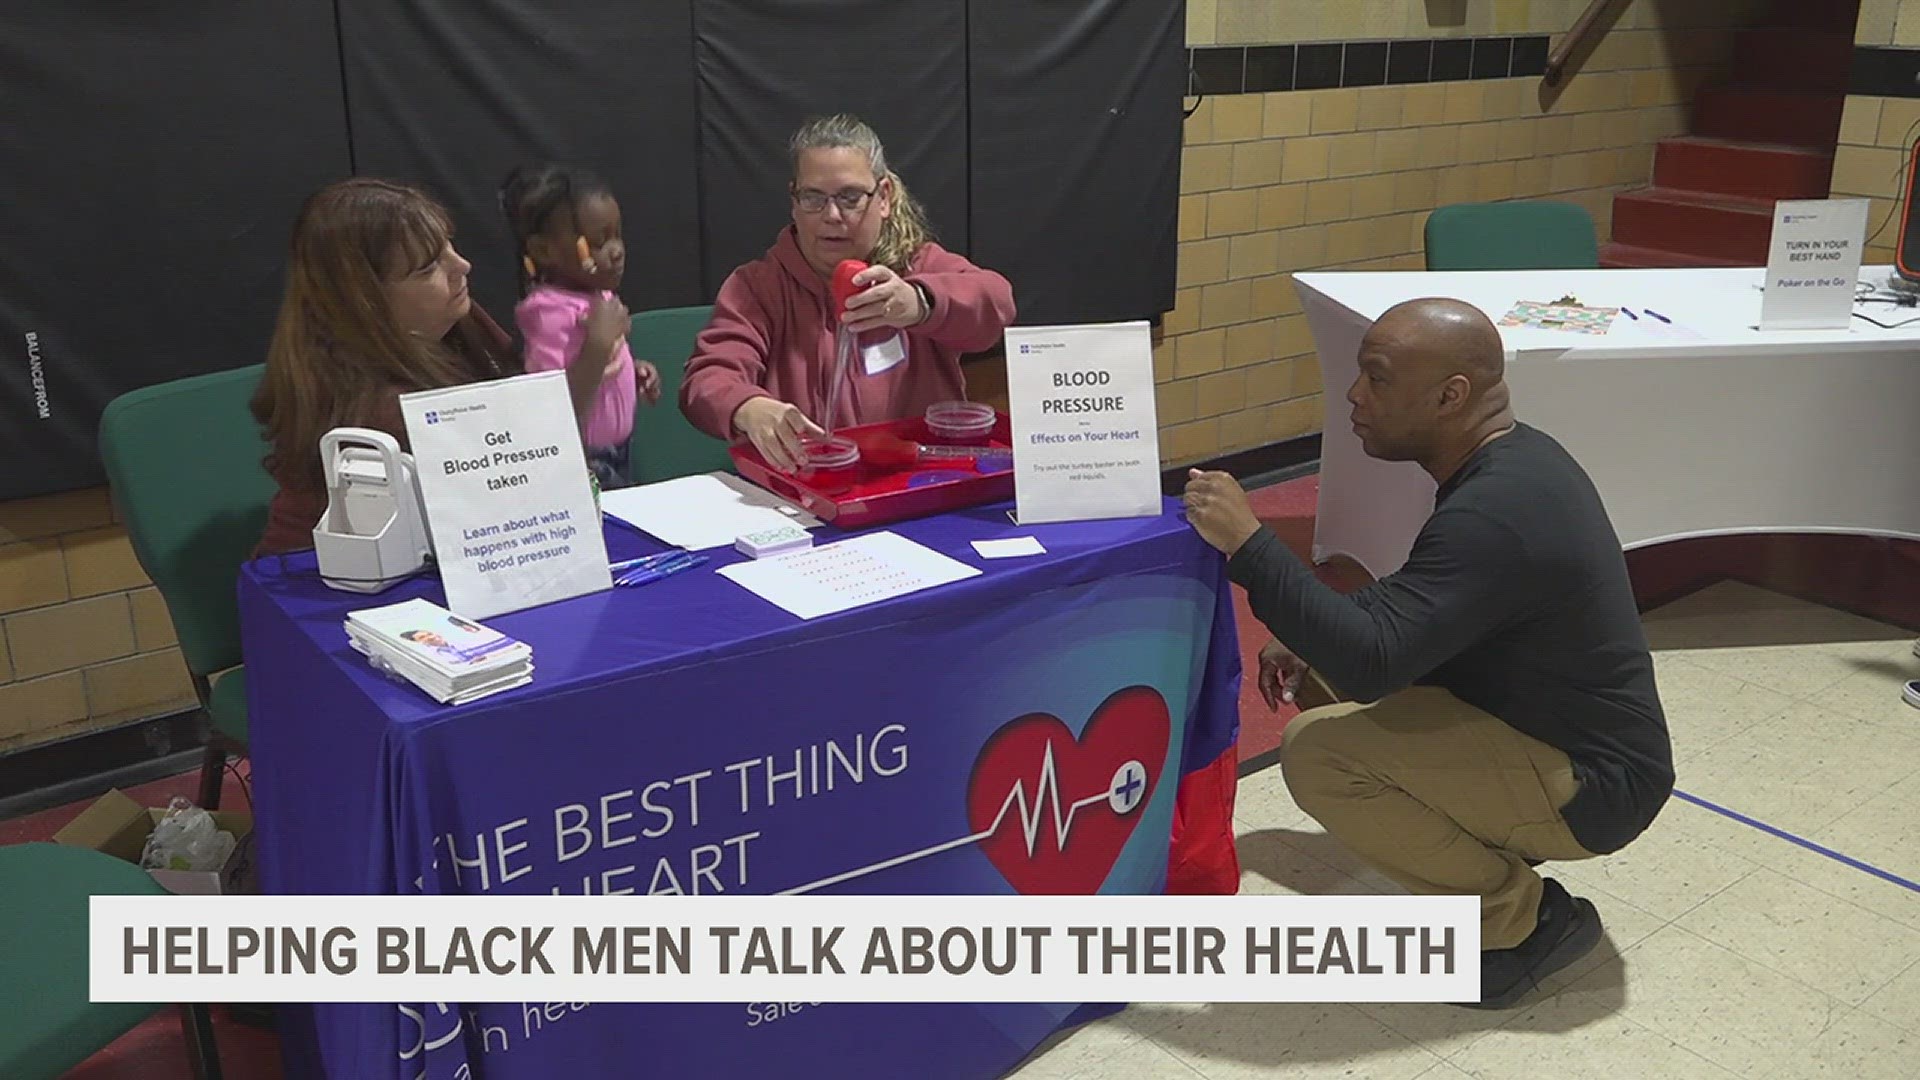 Some men are reluctant to discuss their health. Some QC organizations are trying to change that.